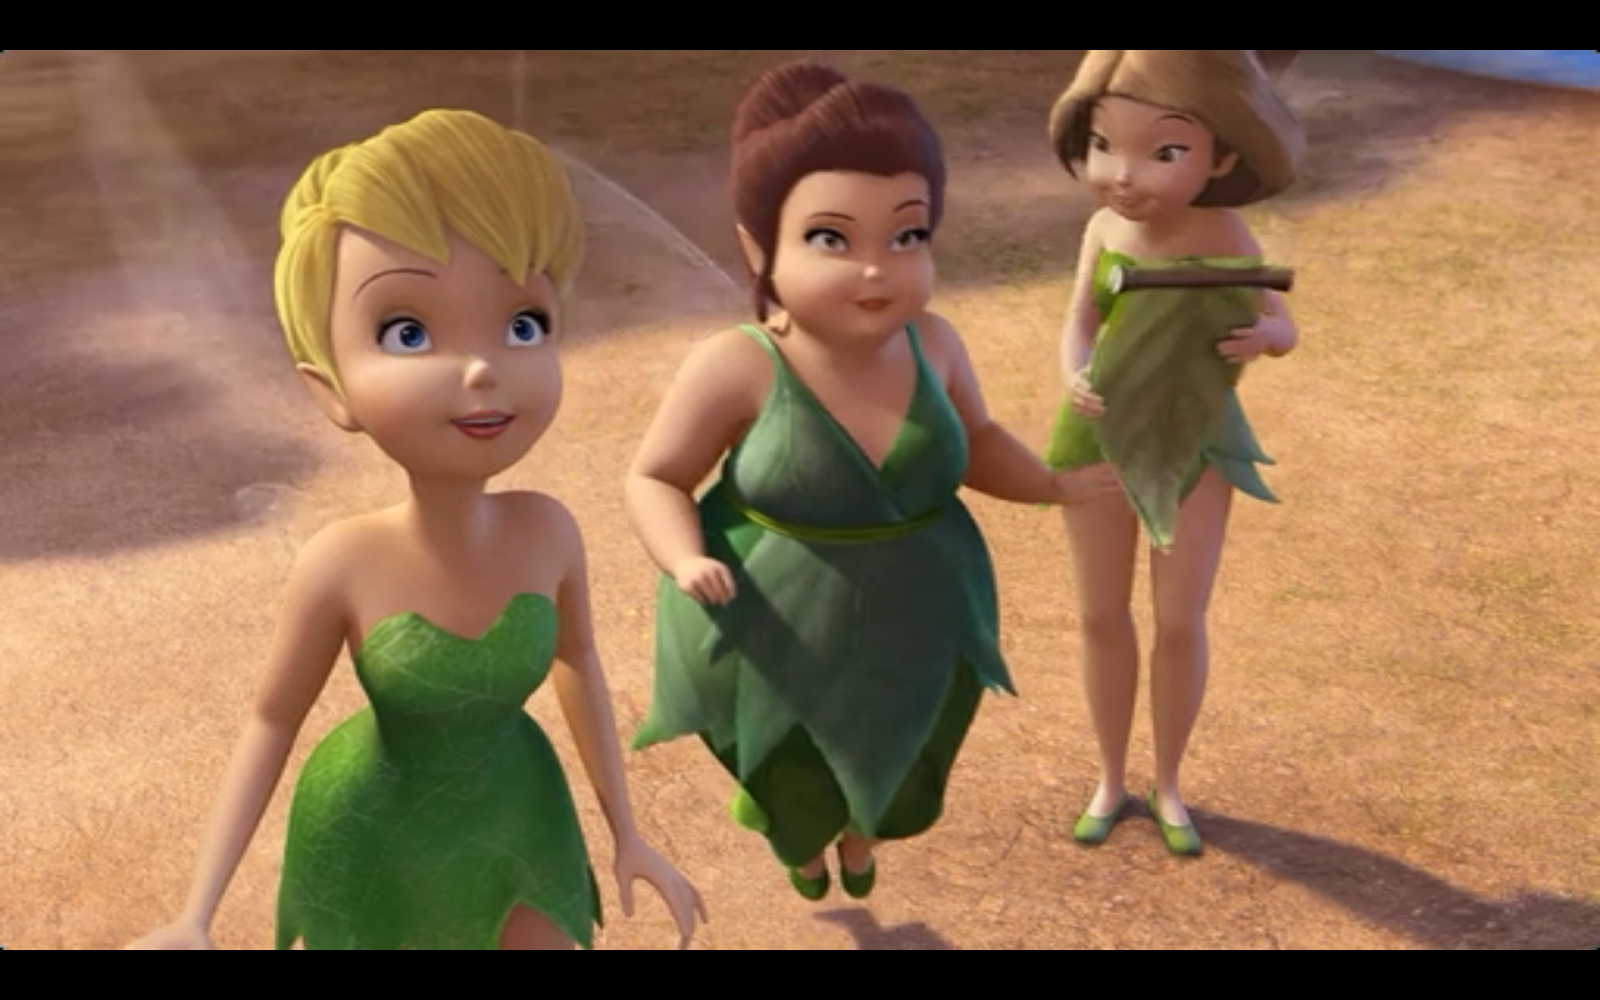 in one of the Tinkerbell fairy movies (specifically Secret of the Wings) wh...